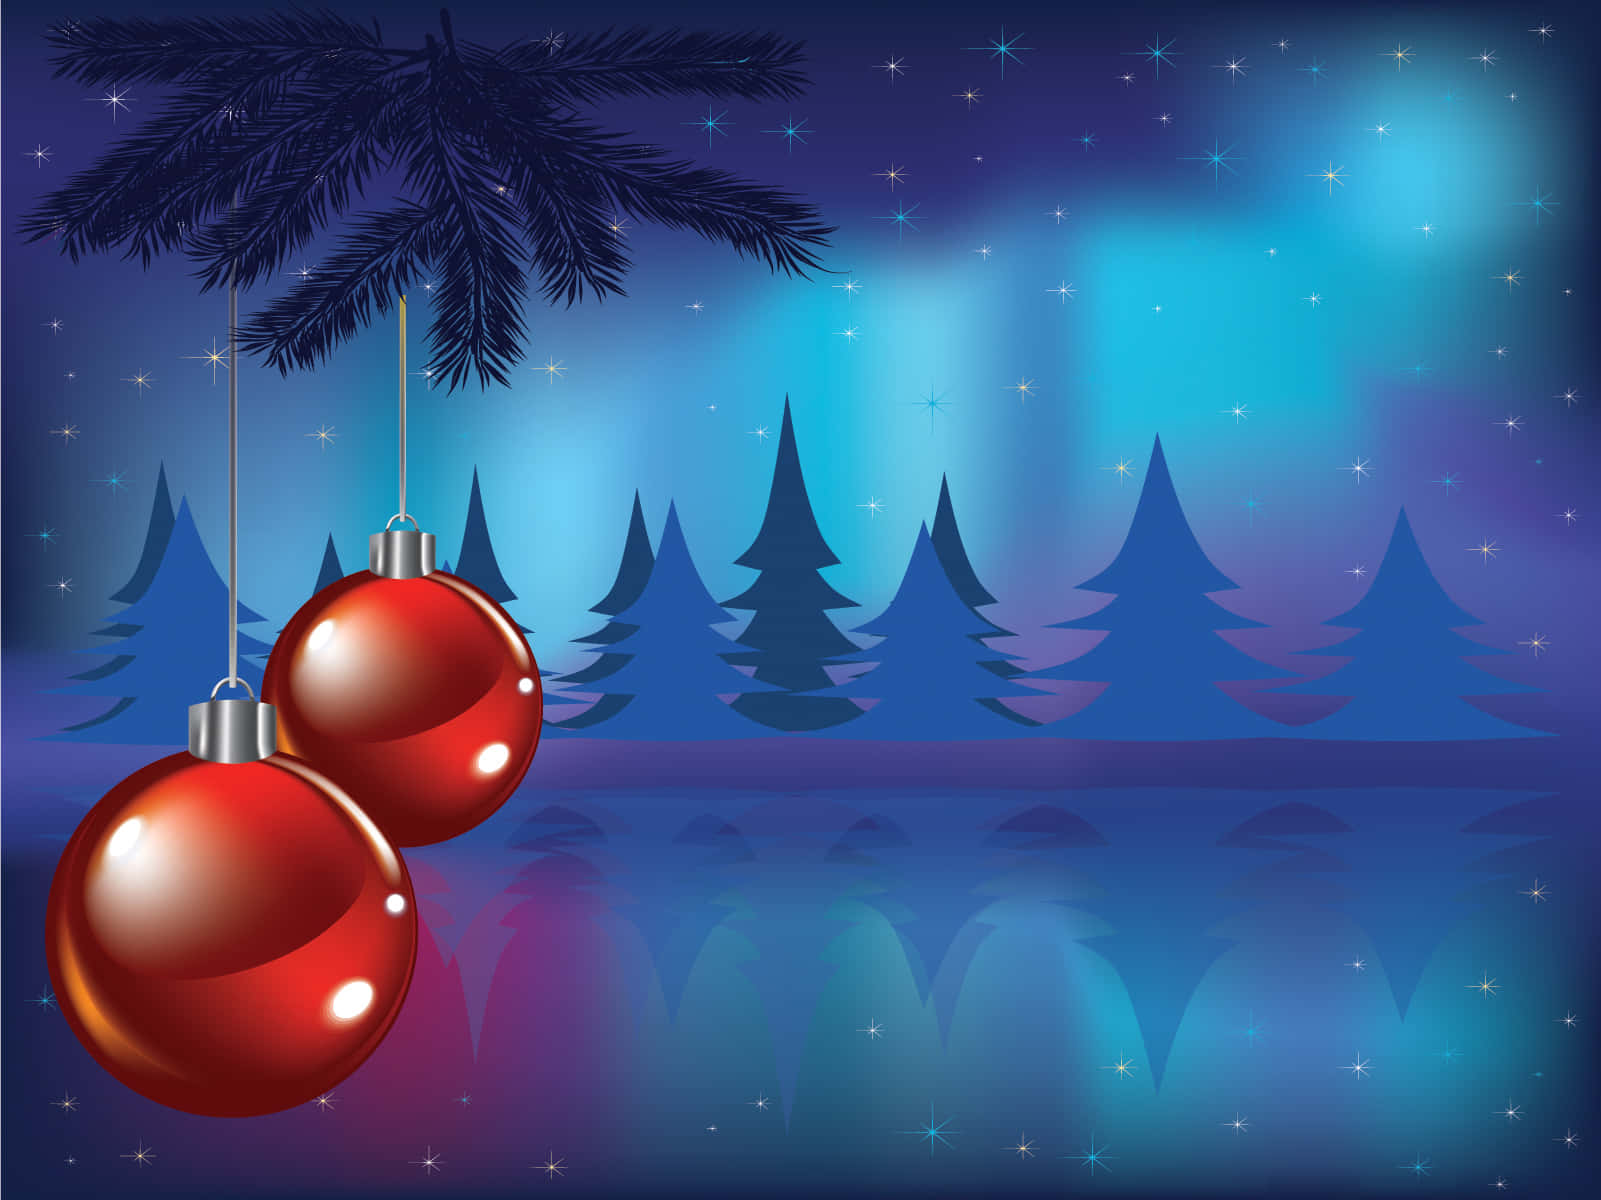 Christmas Tree With Red Balls And Trees On The Lake Vector